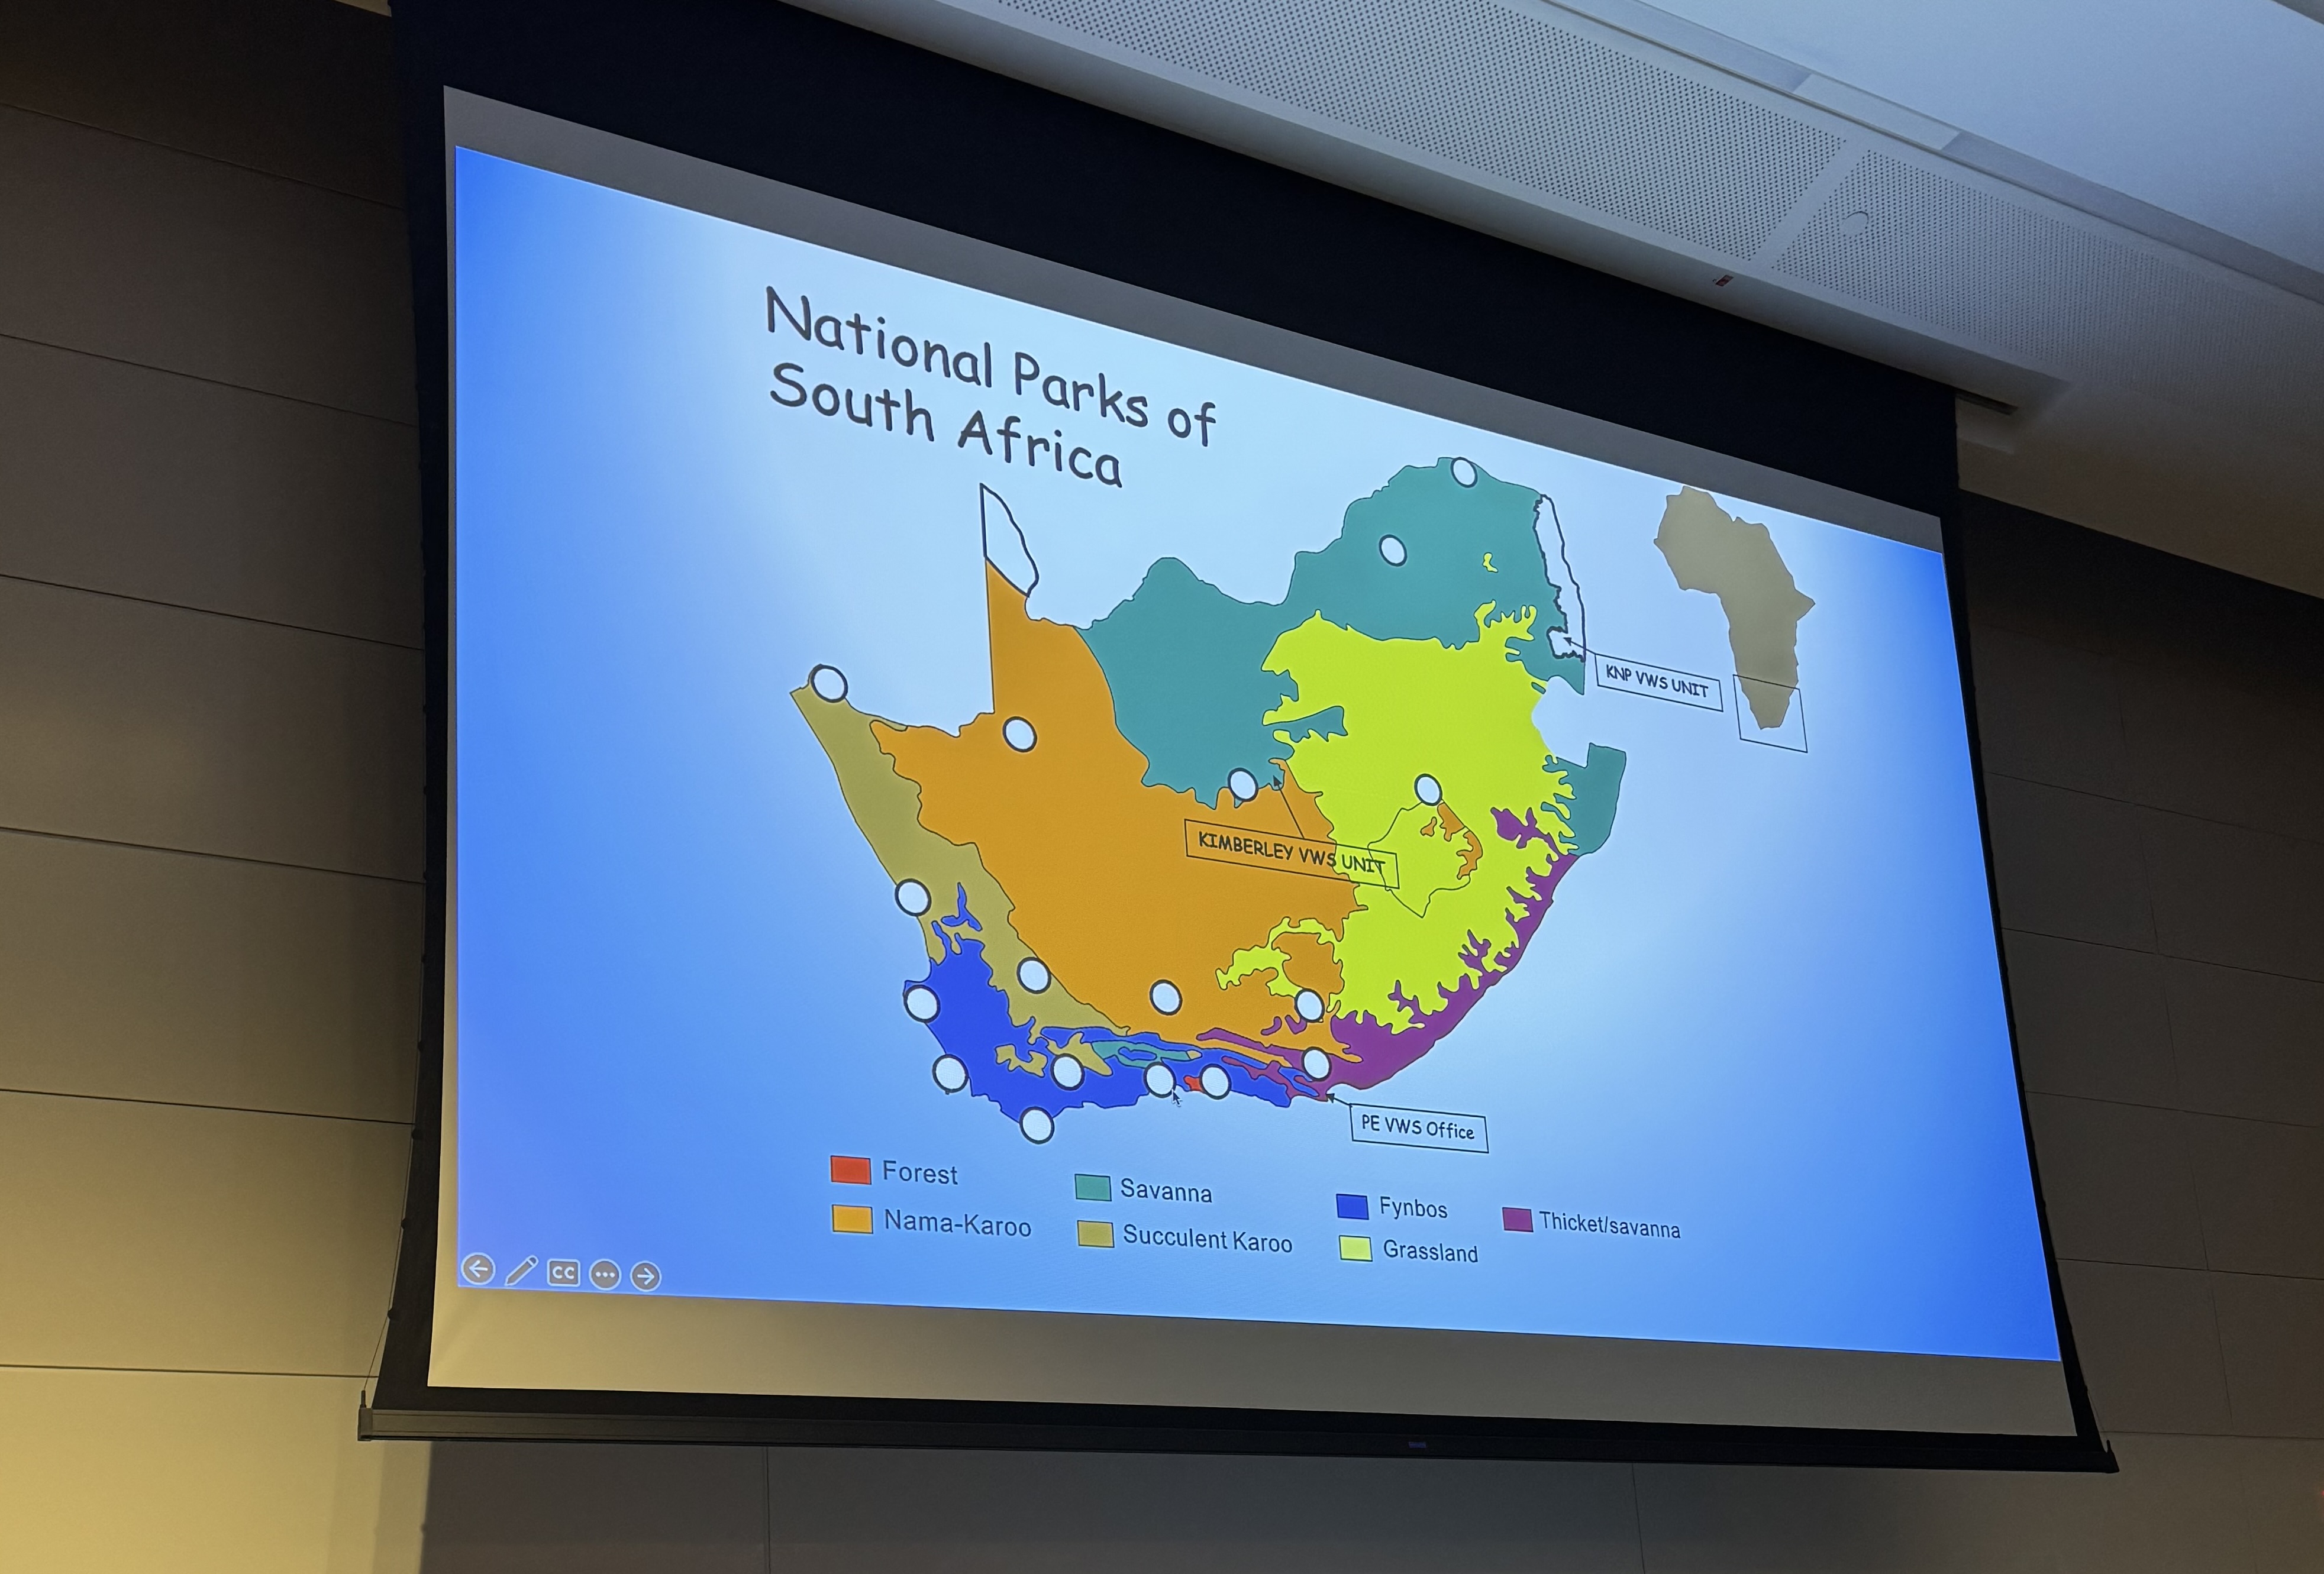 A slide from the Markus Hofmeyr lecture showing the National Parks of South Africa..